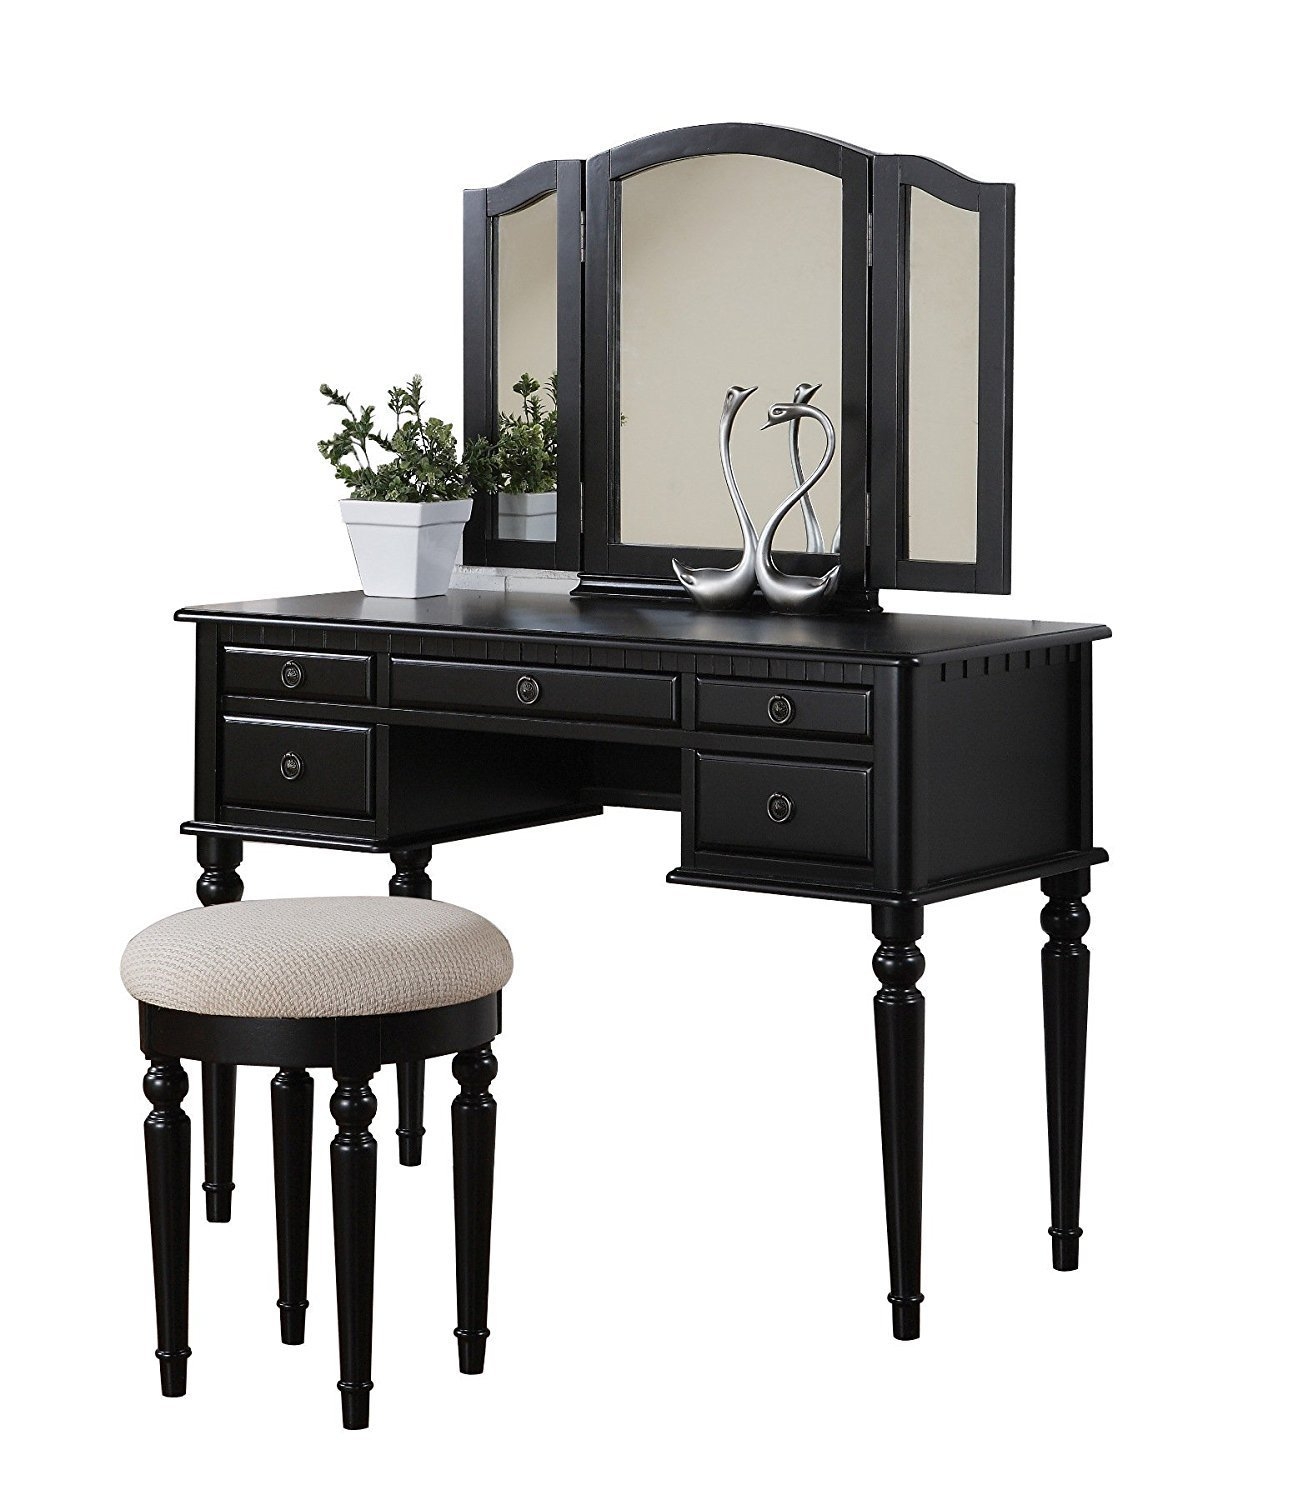 Makeup Vanity Table With Lighted Mirror, Small Cream Vanity Mirror With Lights Desk